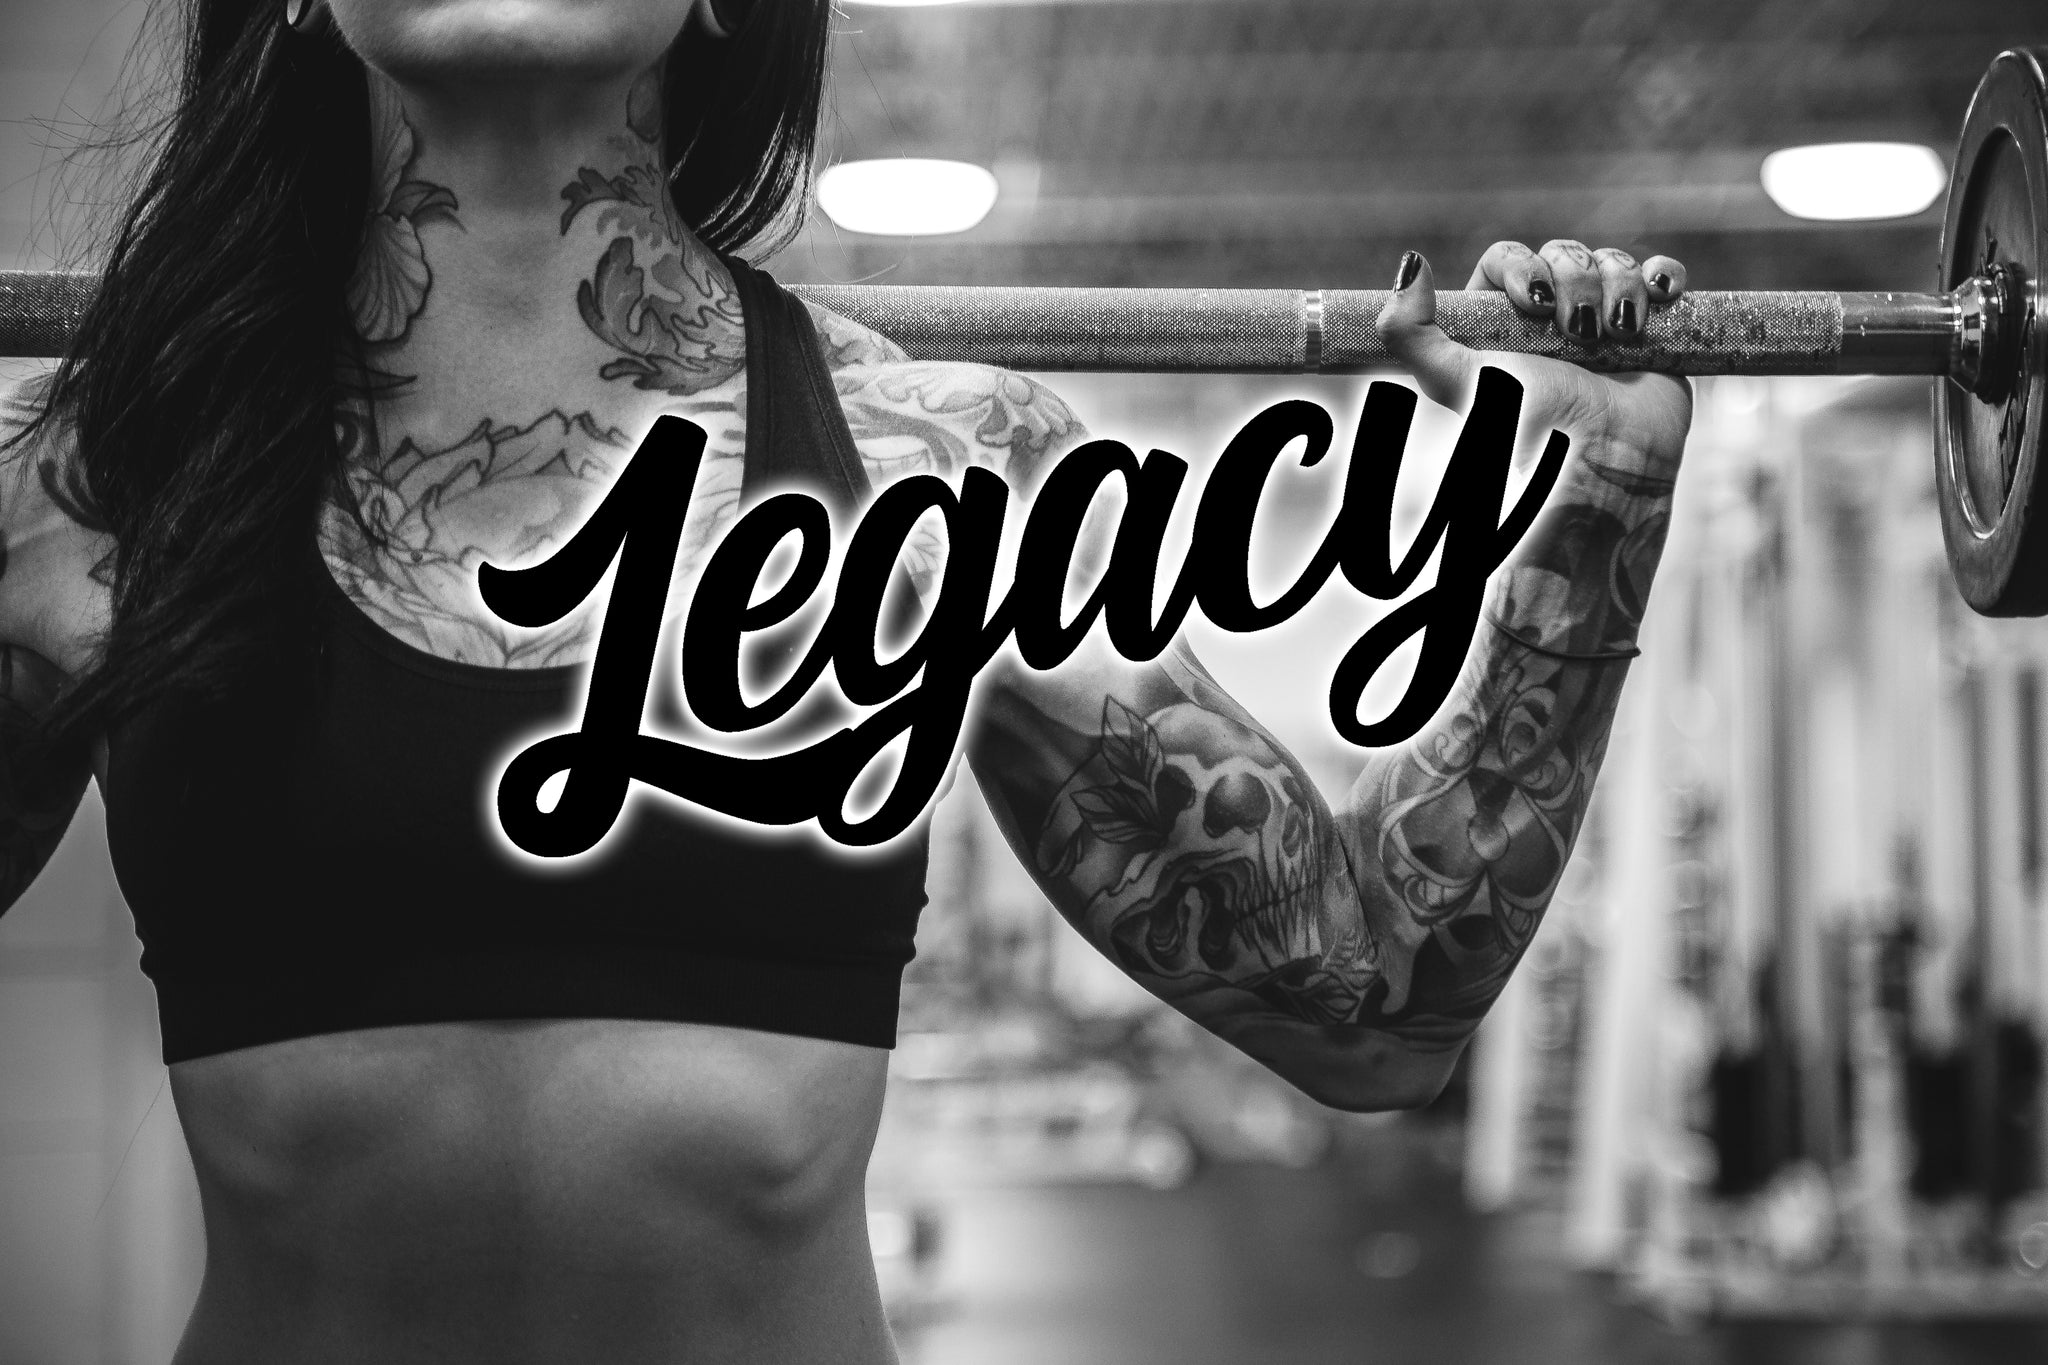 Legacy Fit Supplements